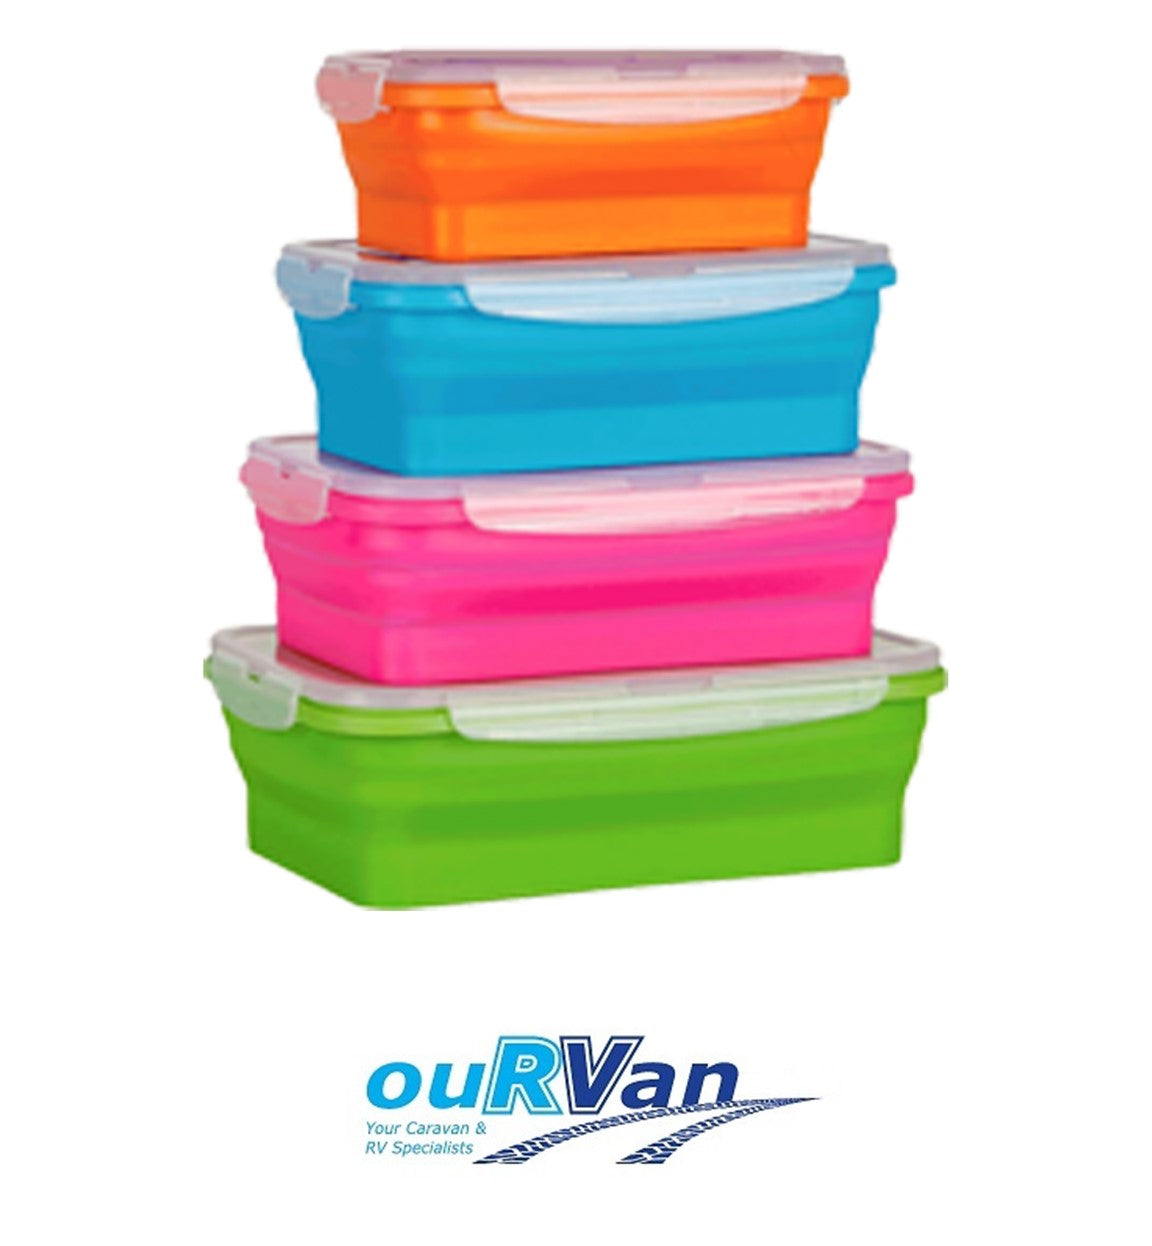 Set of 4 Collapsible Food Storage Containers with Lids, Flat